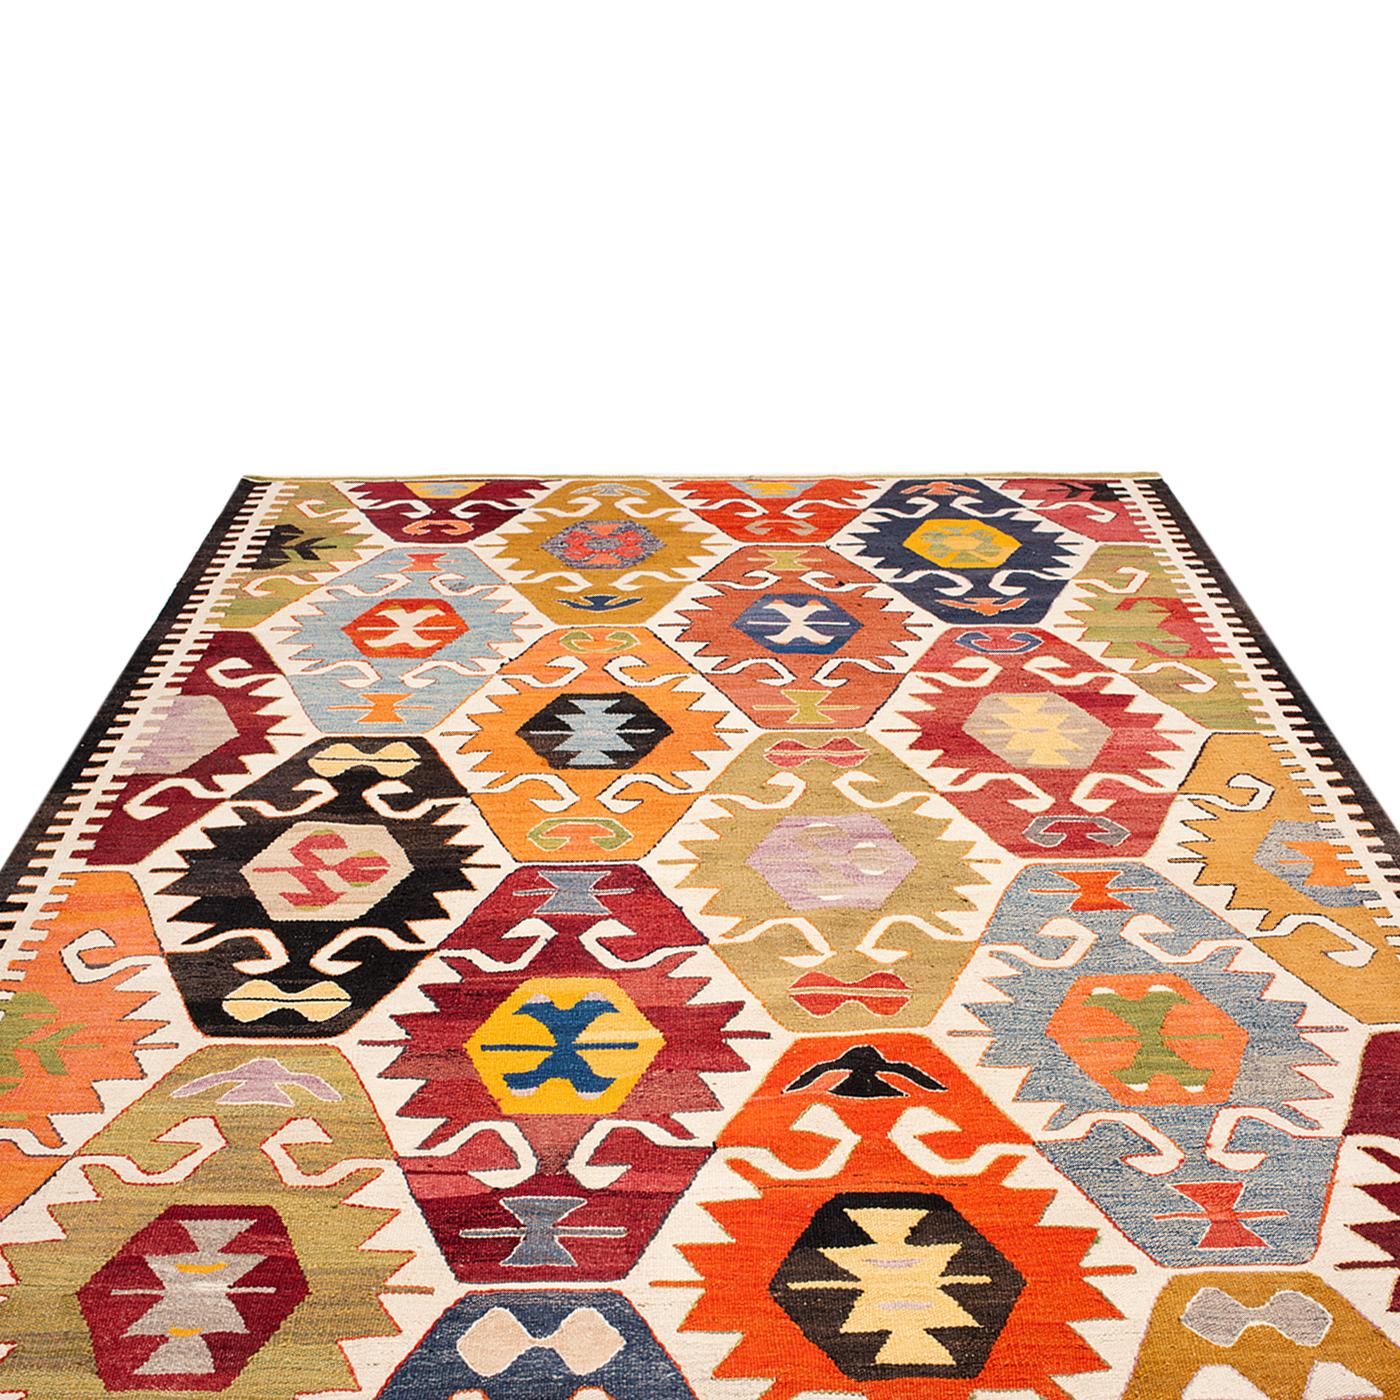 COLOUR: Original
MATERIAL: 100% Recycled wool
QUALITY: Flatweave
ORIGIN: Handwoven rug produced in Istanbul, Turkey
  
STOCK SIZE DISPLAYED: 202cm x 297cm

This Kilim has been hand-woven by female weavers in Turkey, using traditional methods. The